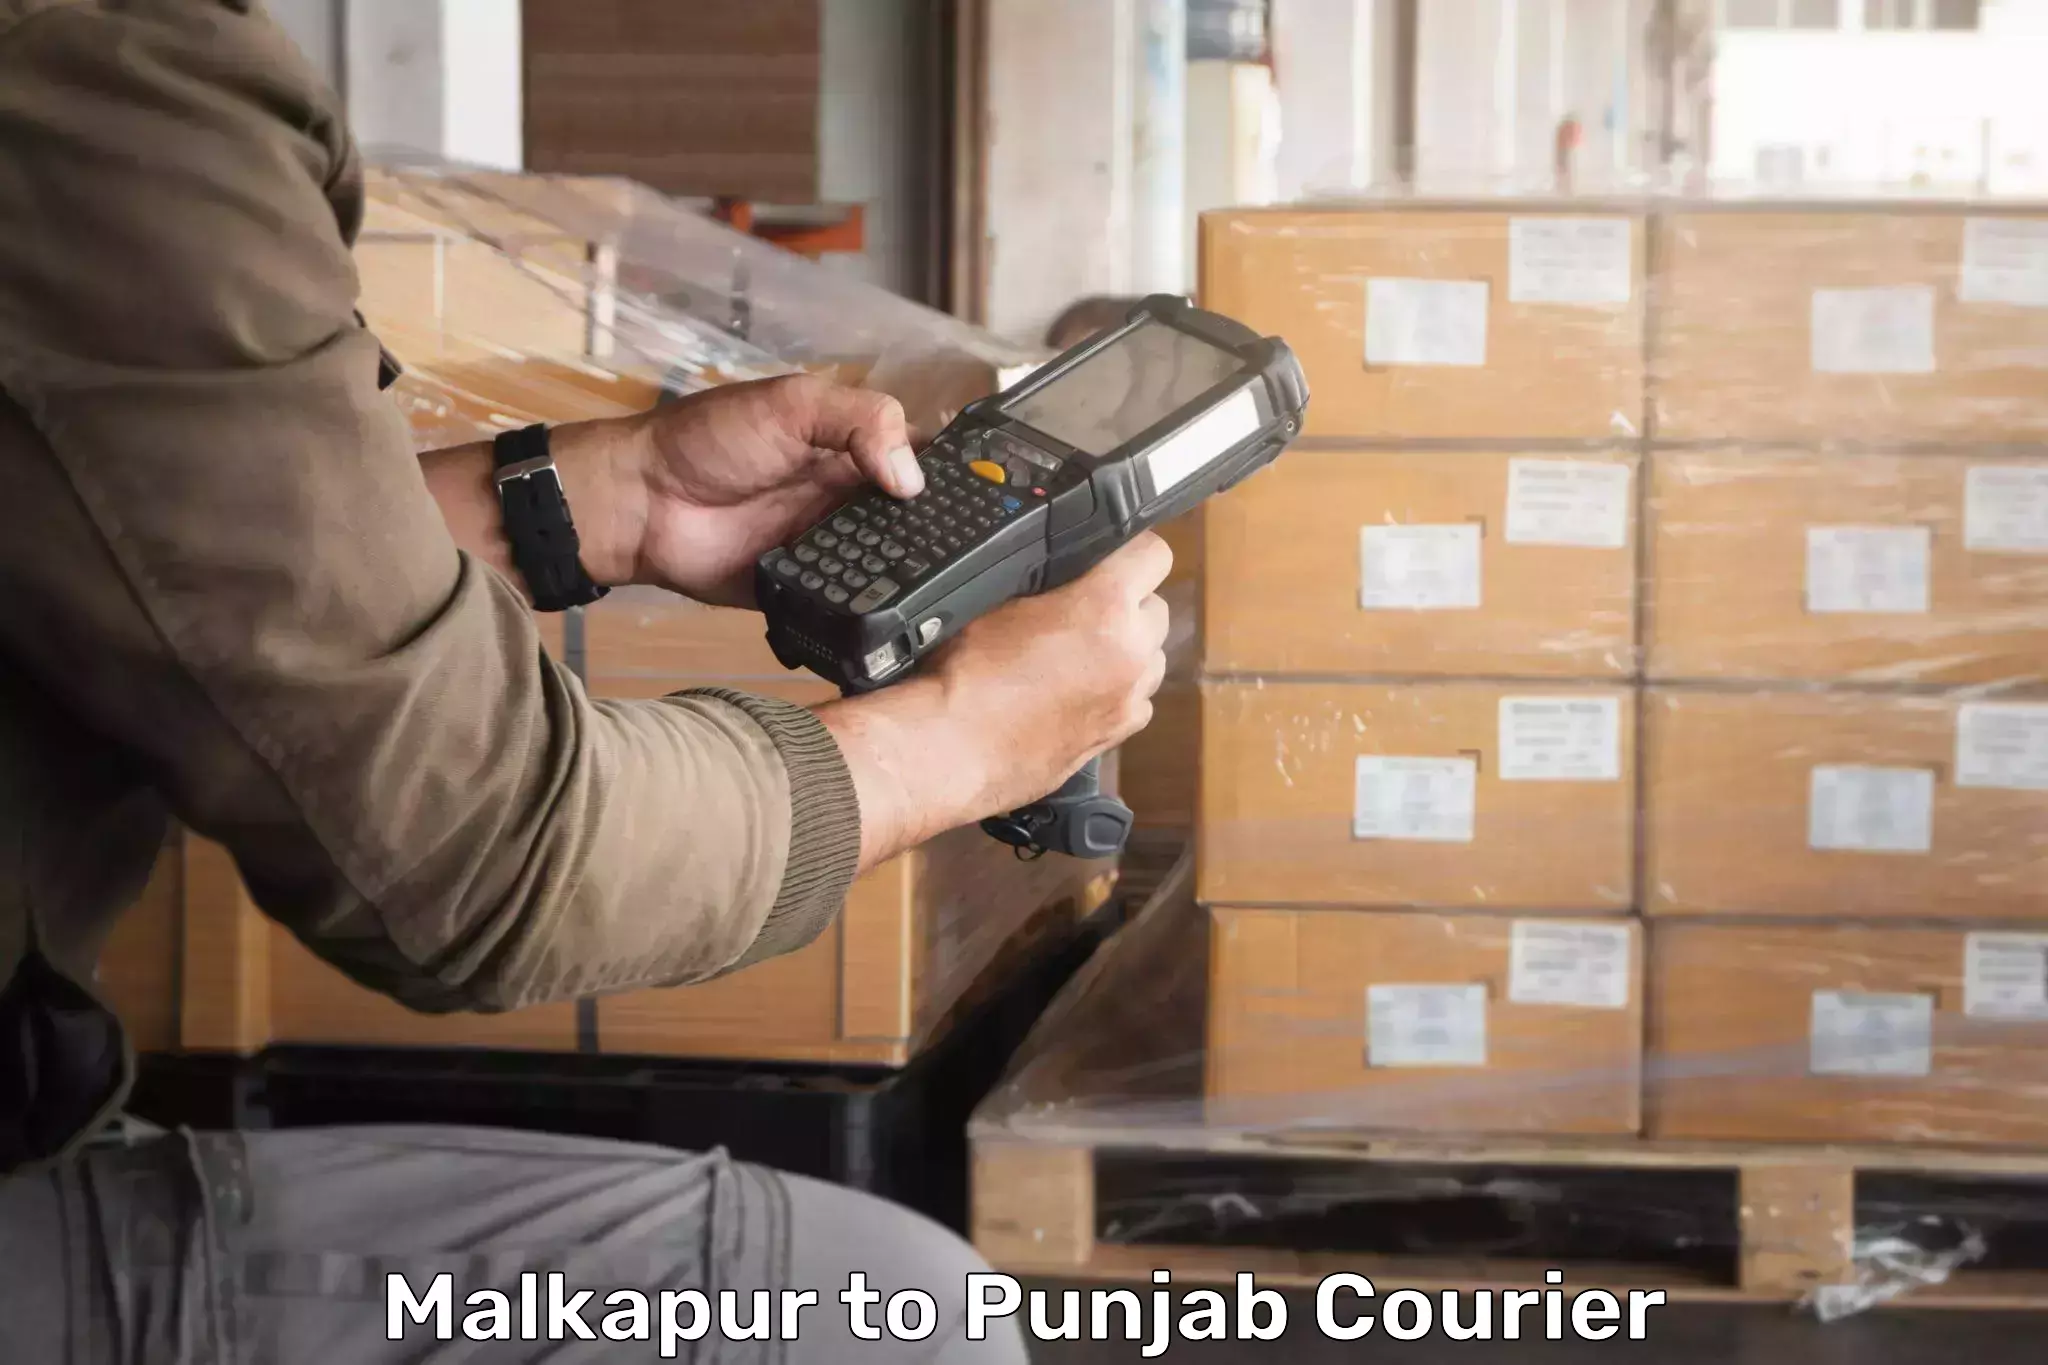 Customer-oriented courier services in Malkapur to Mohali